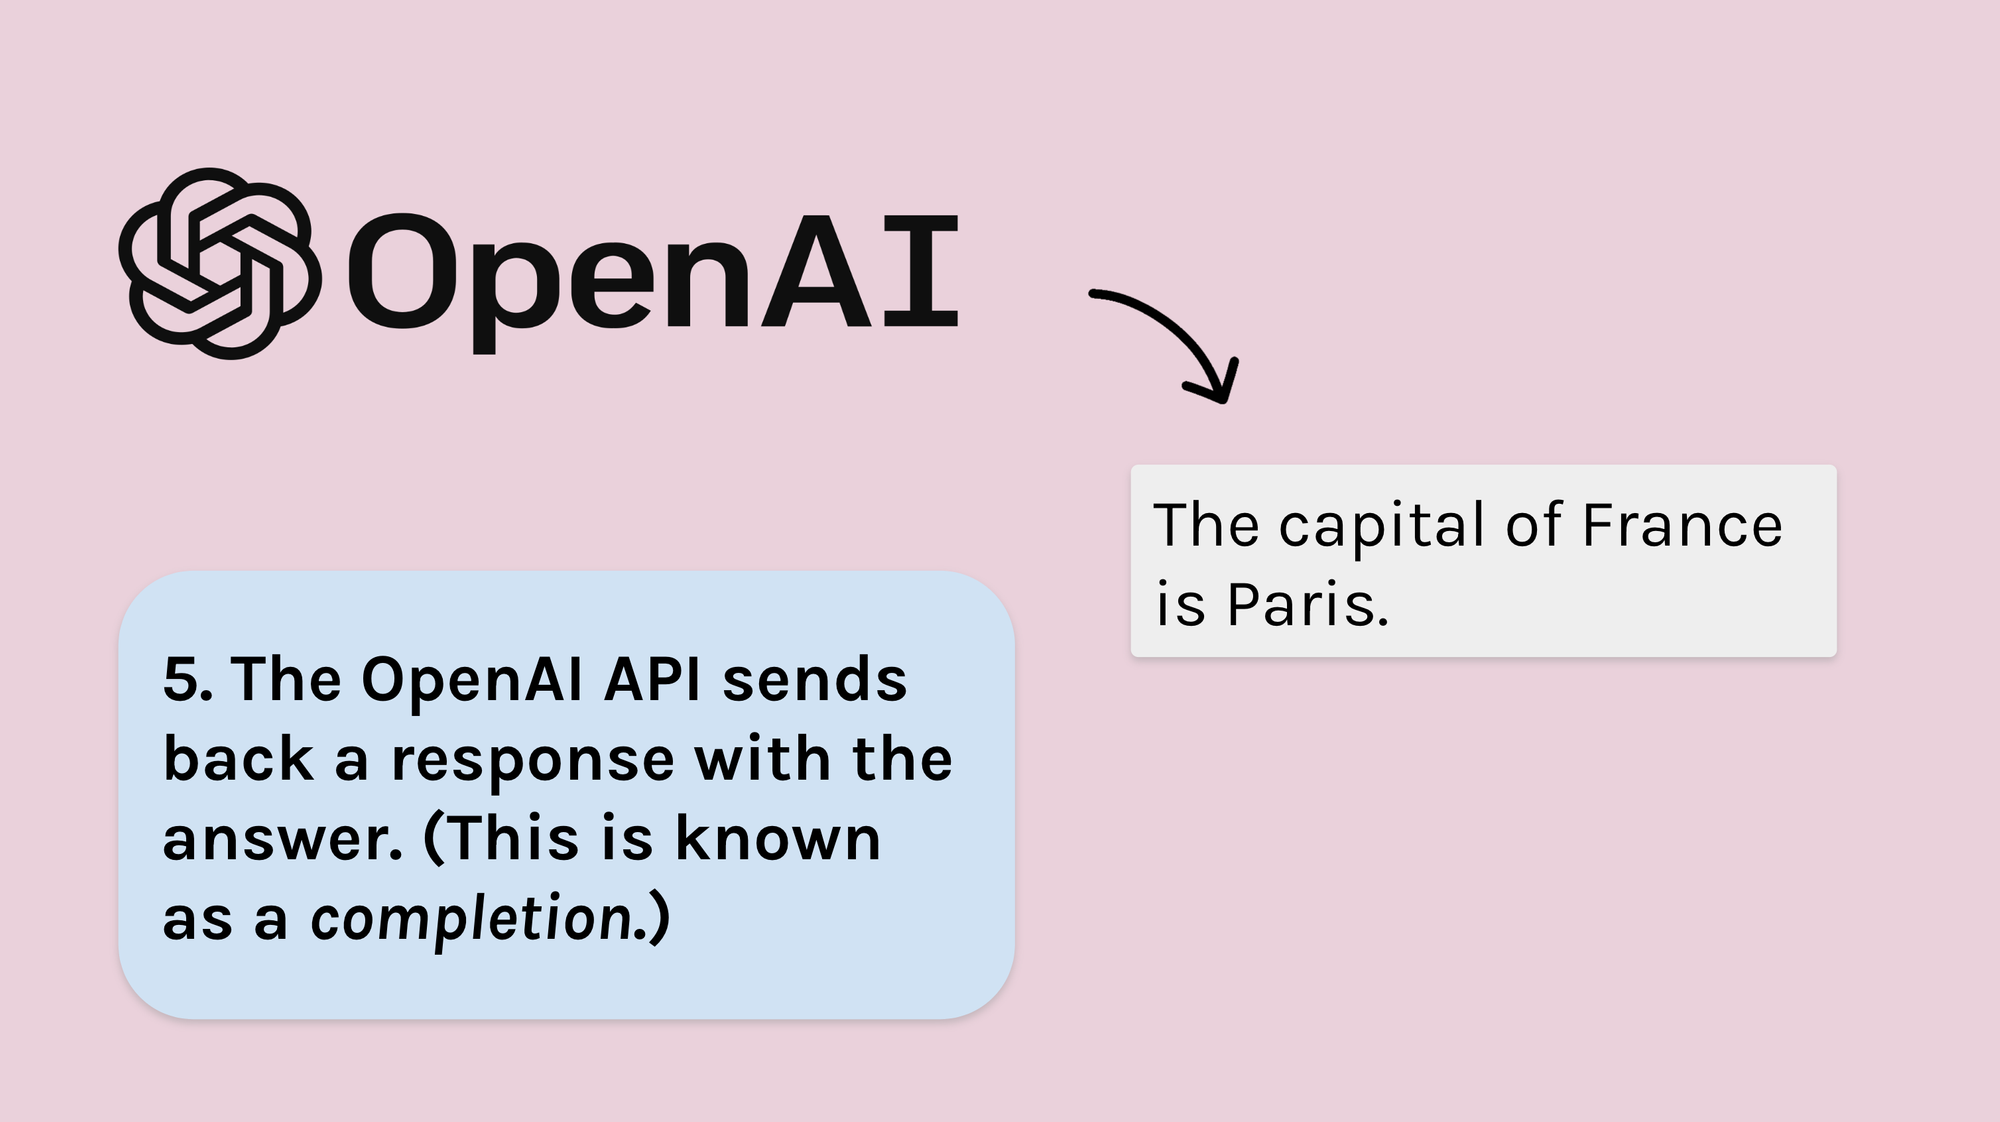 5. The OpenAI API sends back a response with the answer. (This is known as a  completion.)